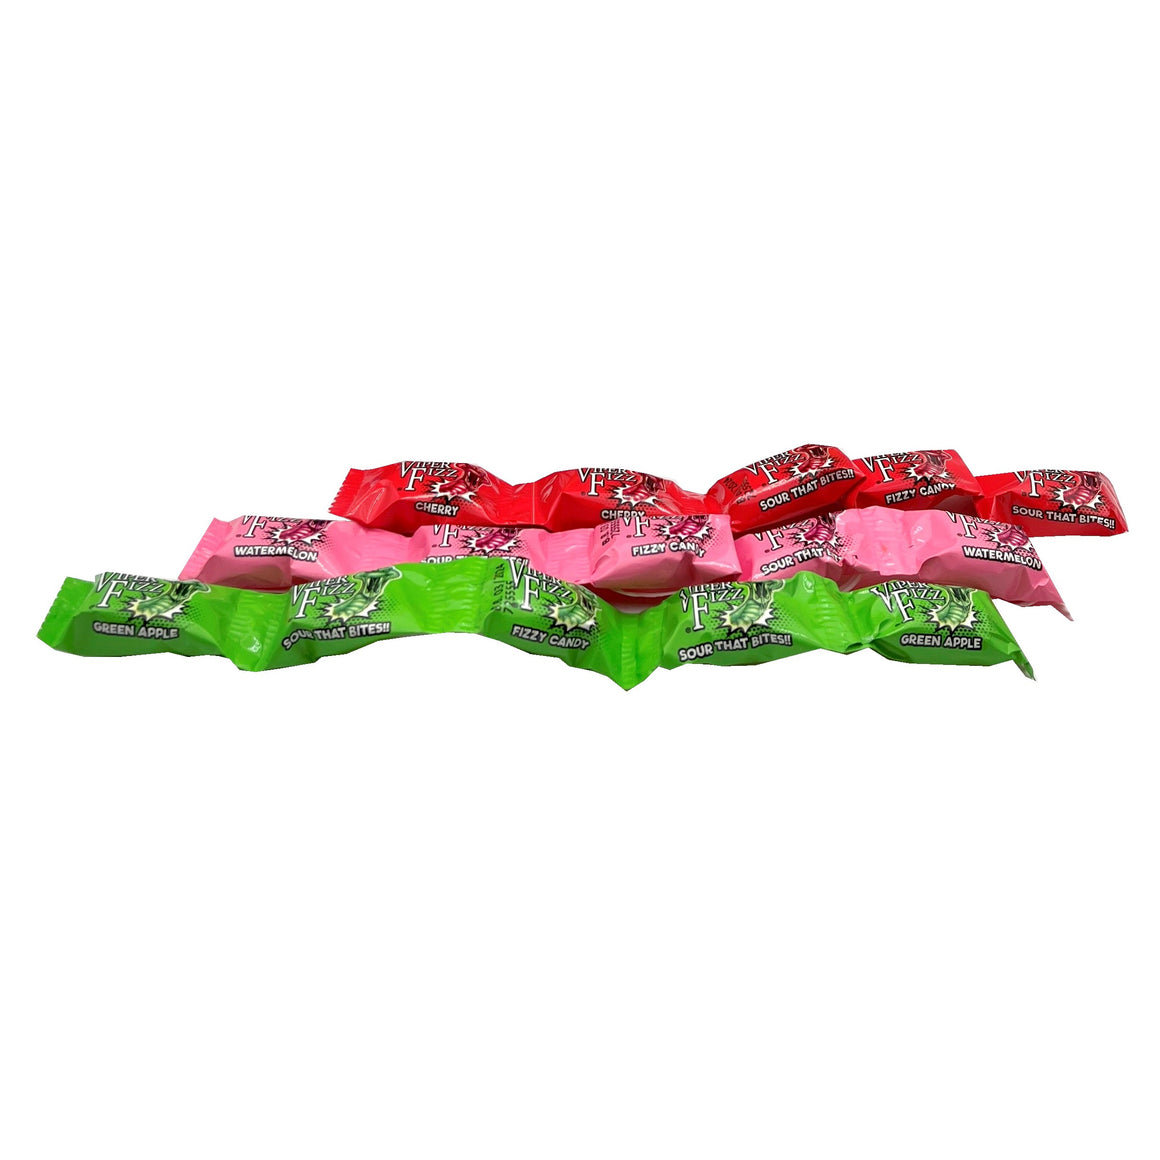 All City Candy Viper Fizz Fizzy Candy Strings (Cherry, Watermelon, Green Apple) 0.9 oz. Novelty Espeez For fresh candy and great service, visit www.allcitycandy.com